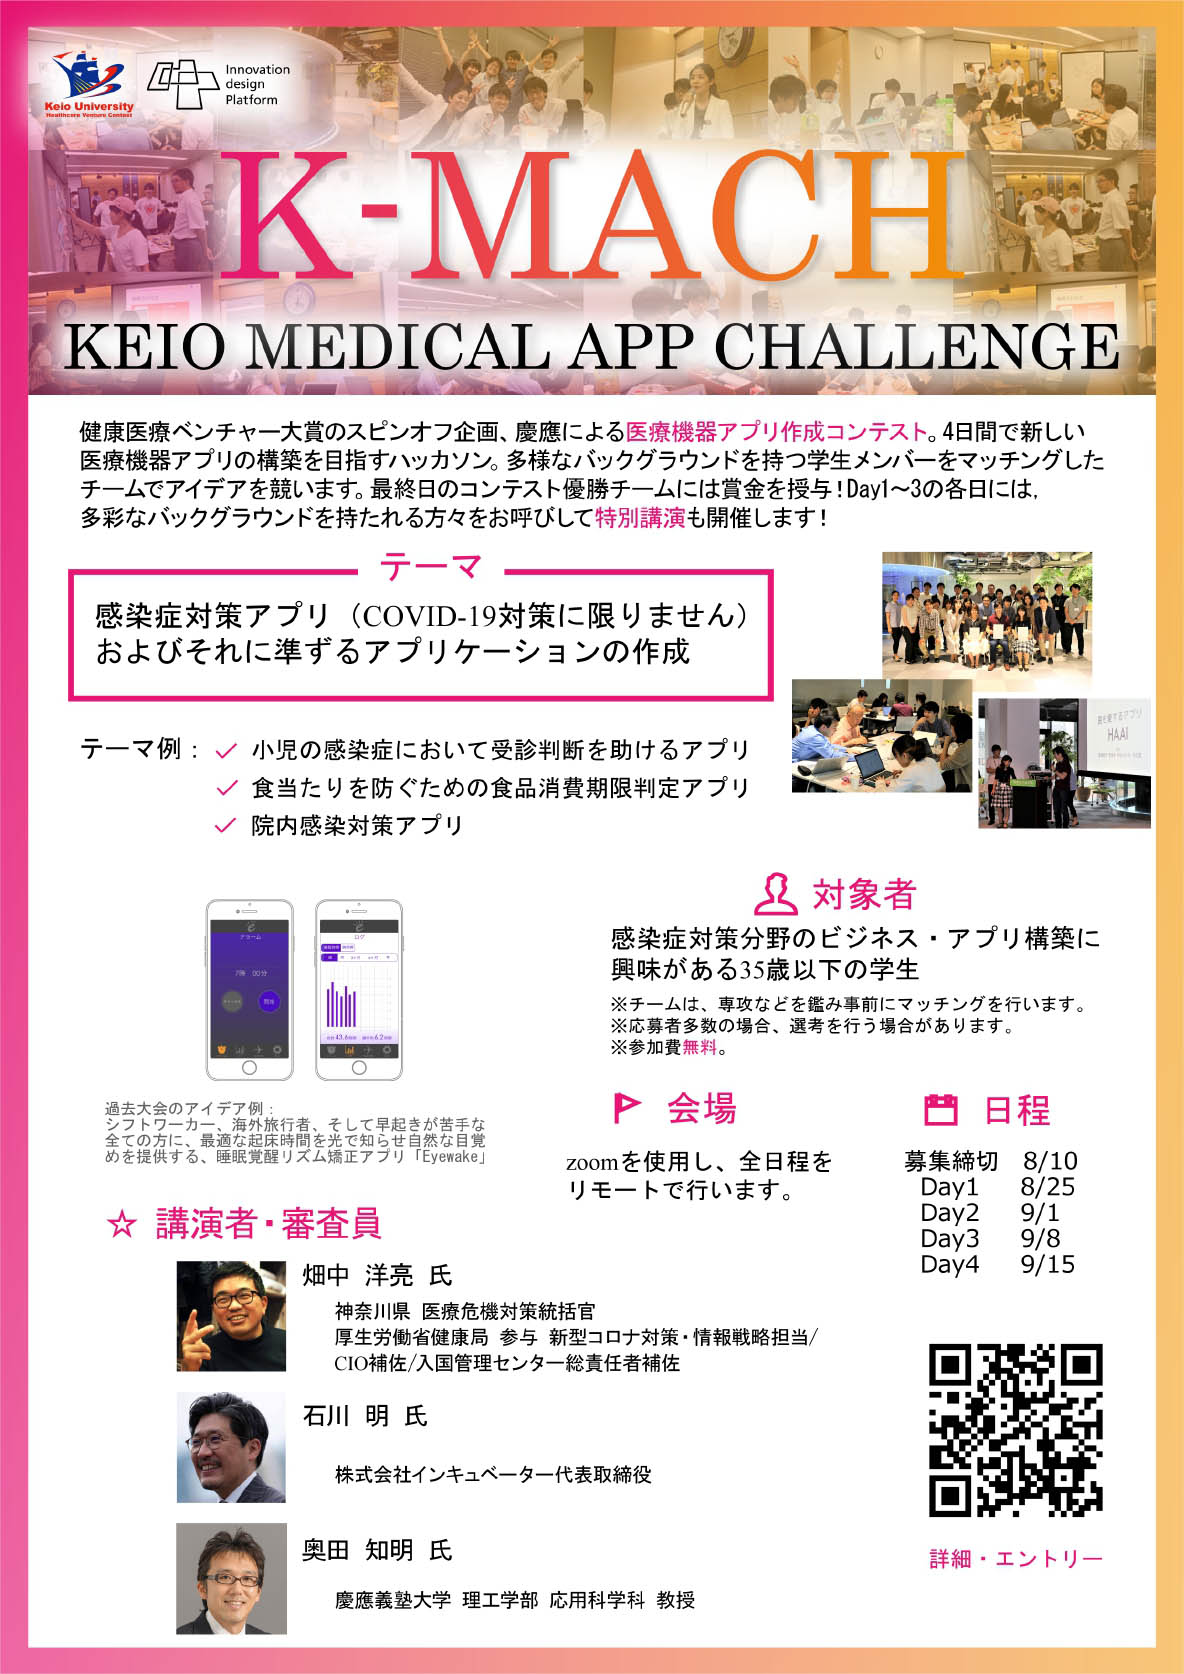 KEIO MEDICAL APP CHALLENGE (K-MACH)] Call for Participants